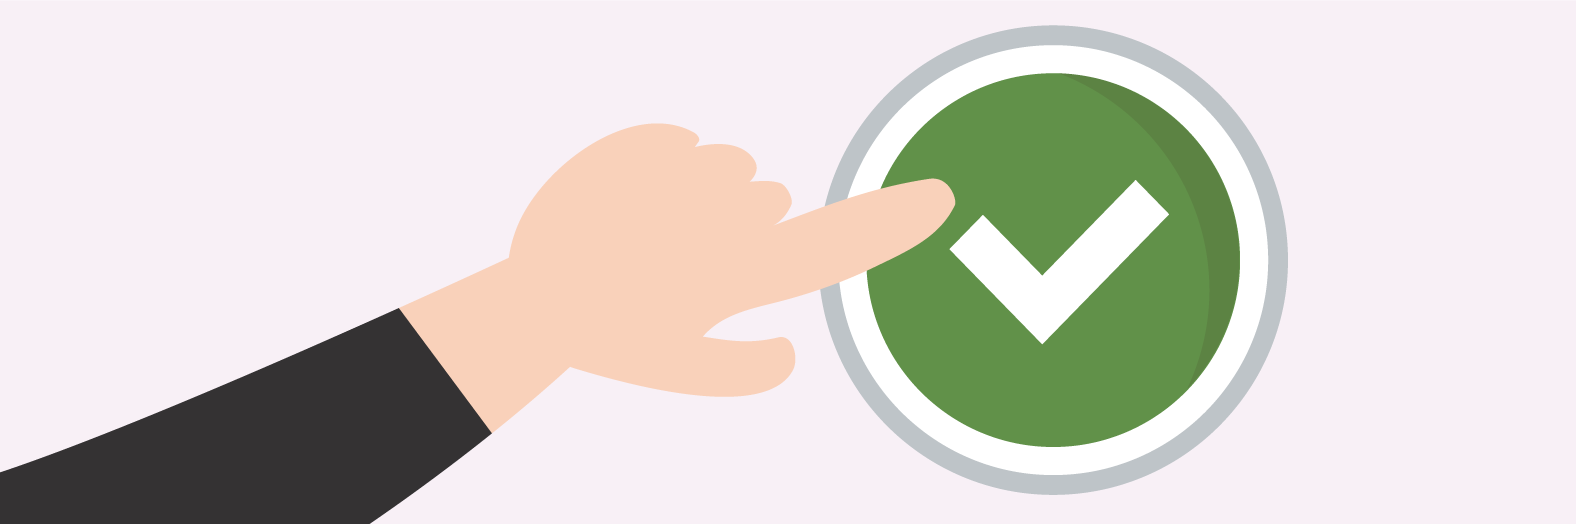 Vector-hand-pointing-to-green-approval-button